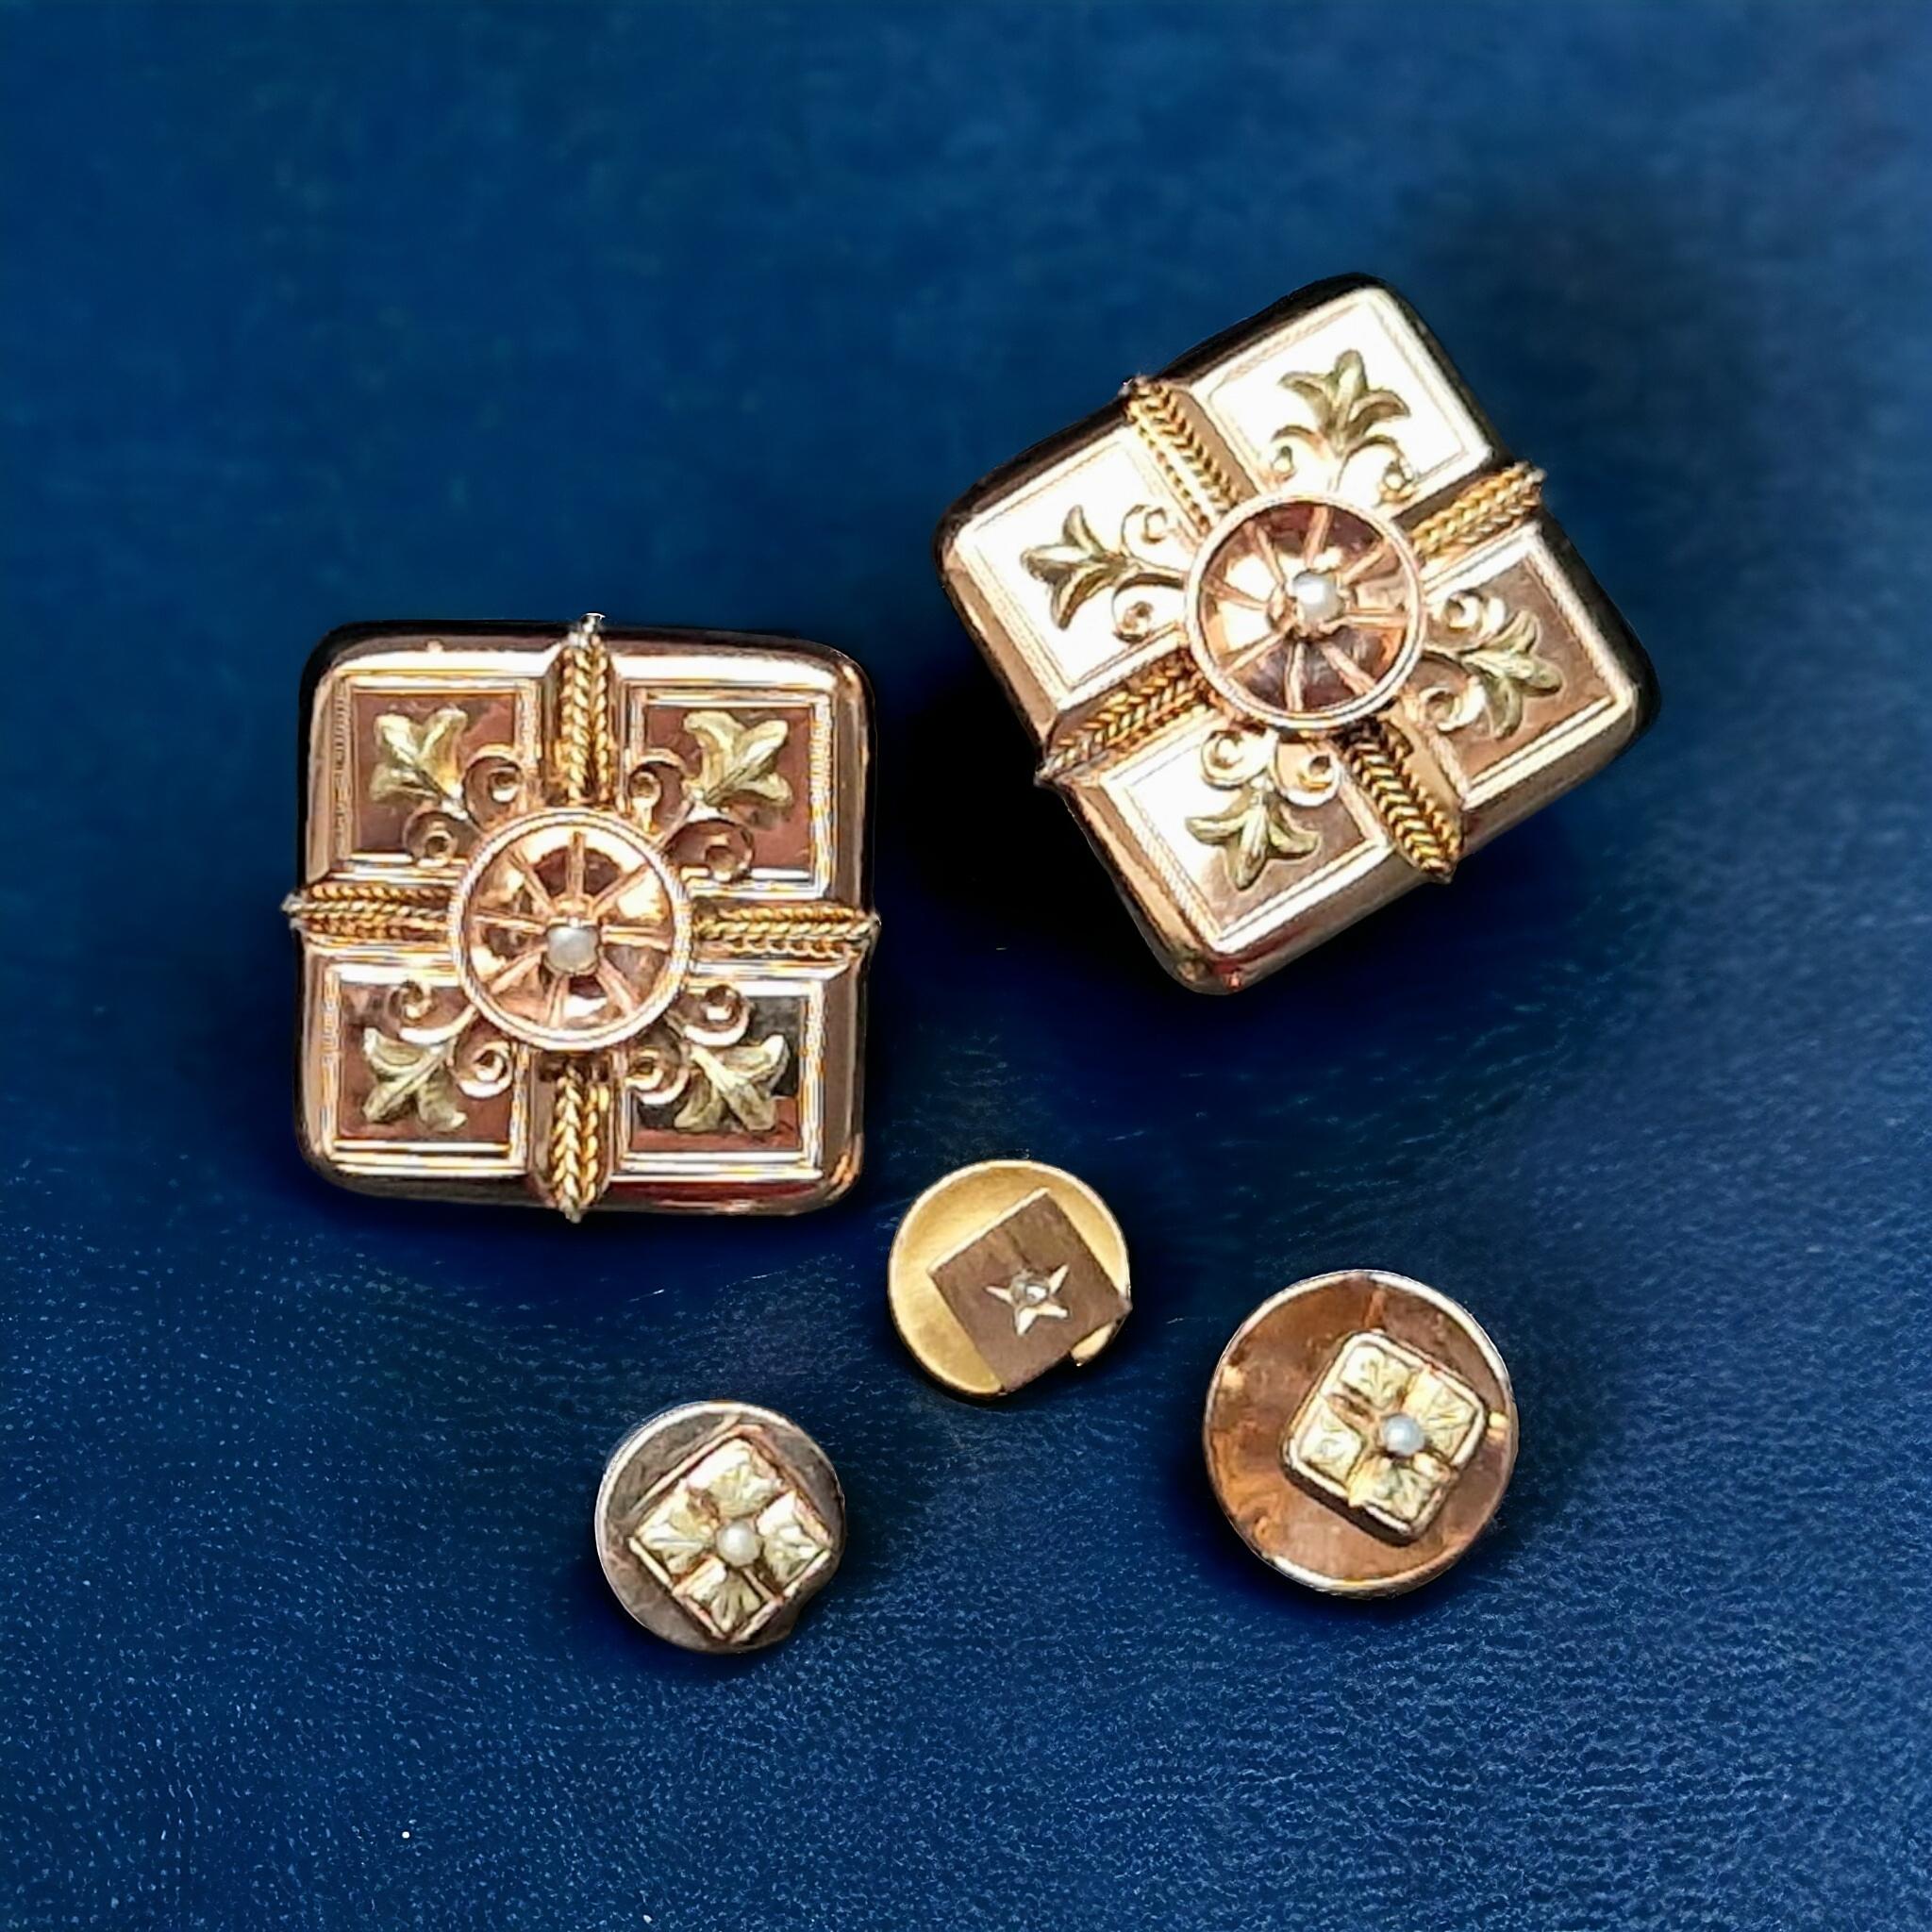 PAIR OF ANTIQUE FRENCH CUFFLINKS & MATCHING STUDS WITH ENGRAVED FLEUR DE LIS MOTIF DESIGN.
19th C (approx. 1850) in 18 Karat yellow and rose Gold.
A  rare dress set dating from the mid 19th century, France. Comprising cufflinks and studs in superb